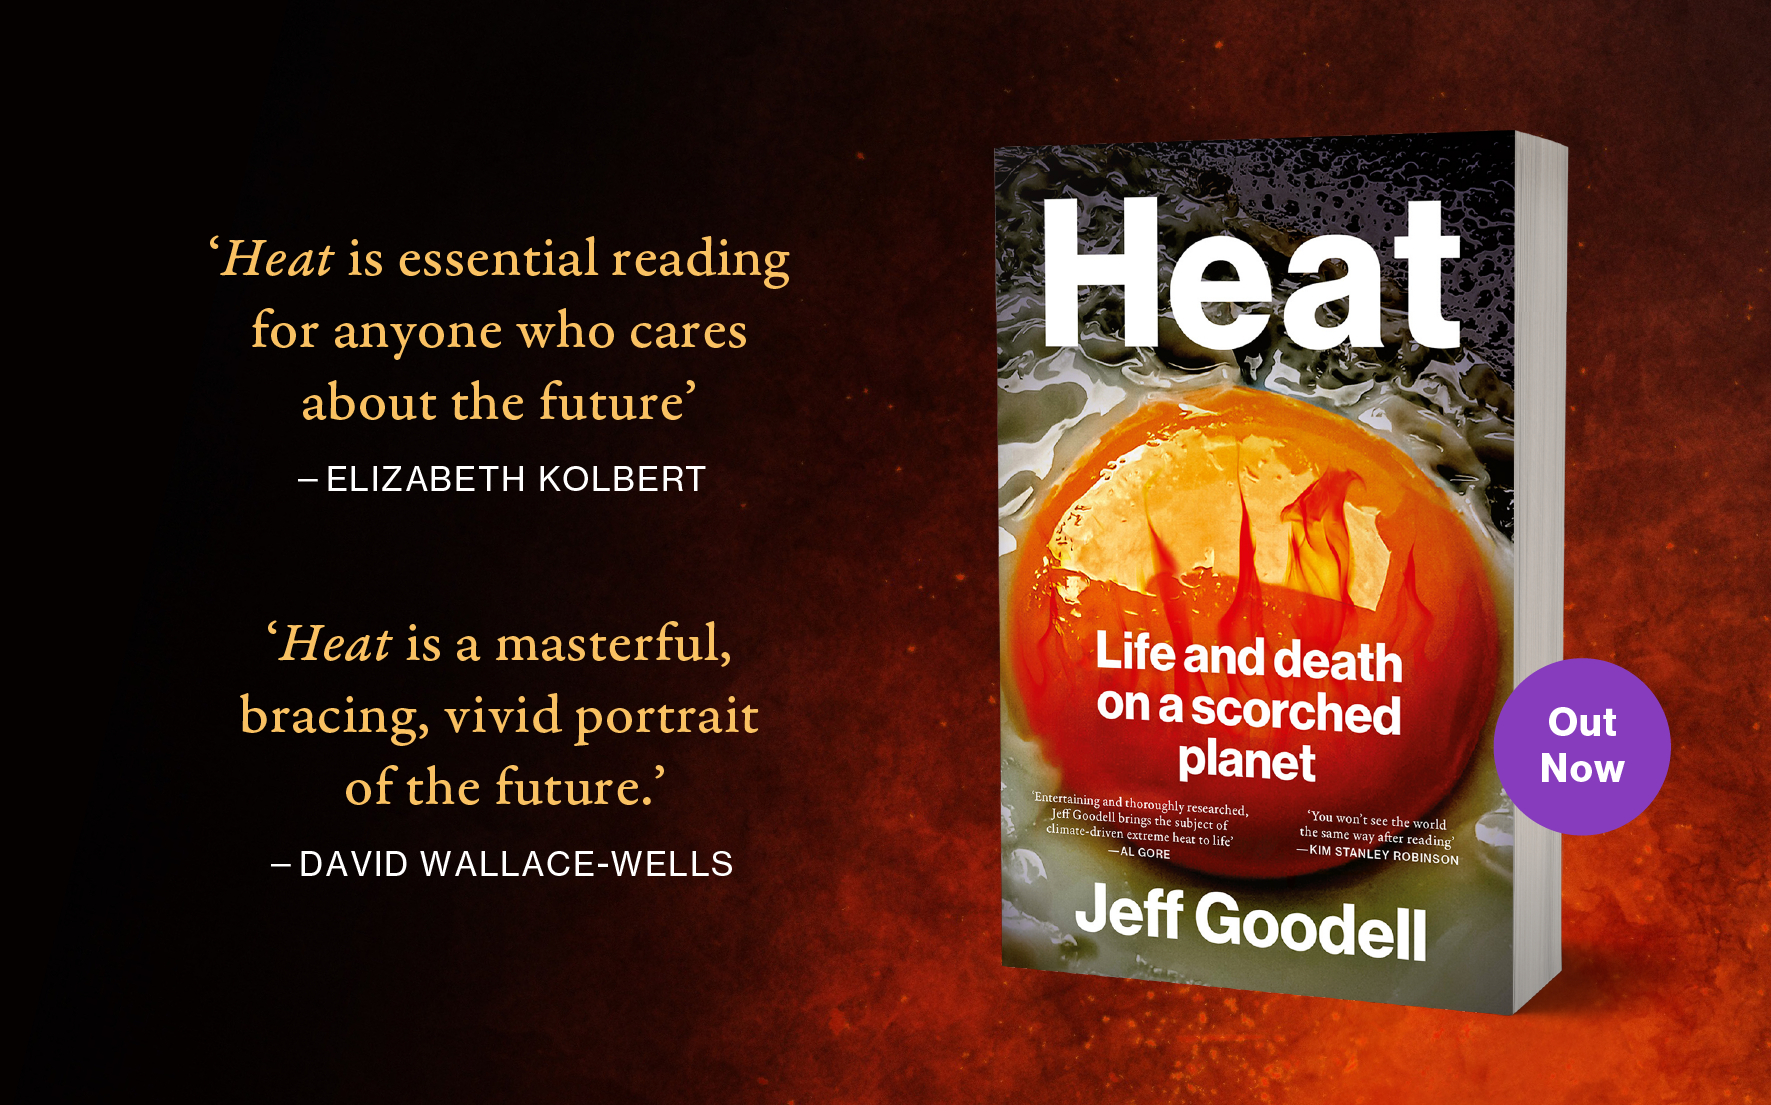 Out now: Heat: Life and Death on a Scorched Planet